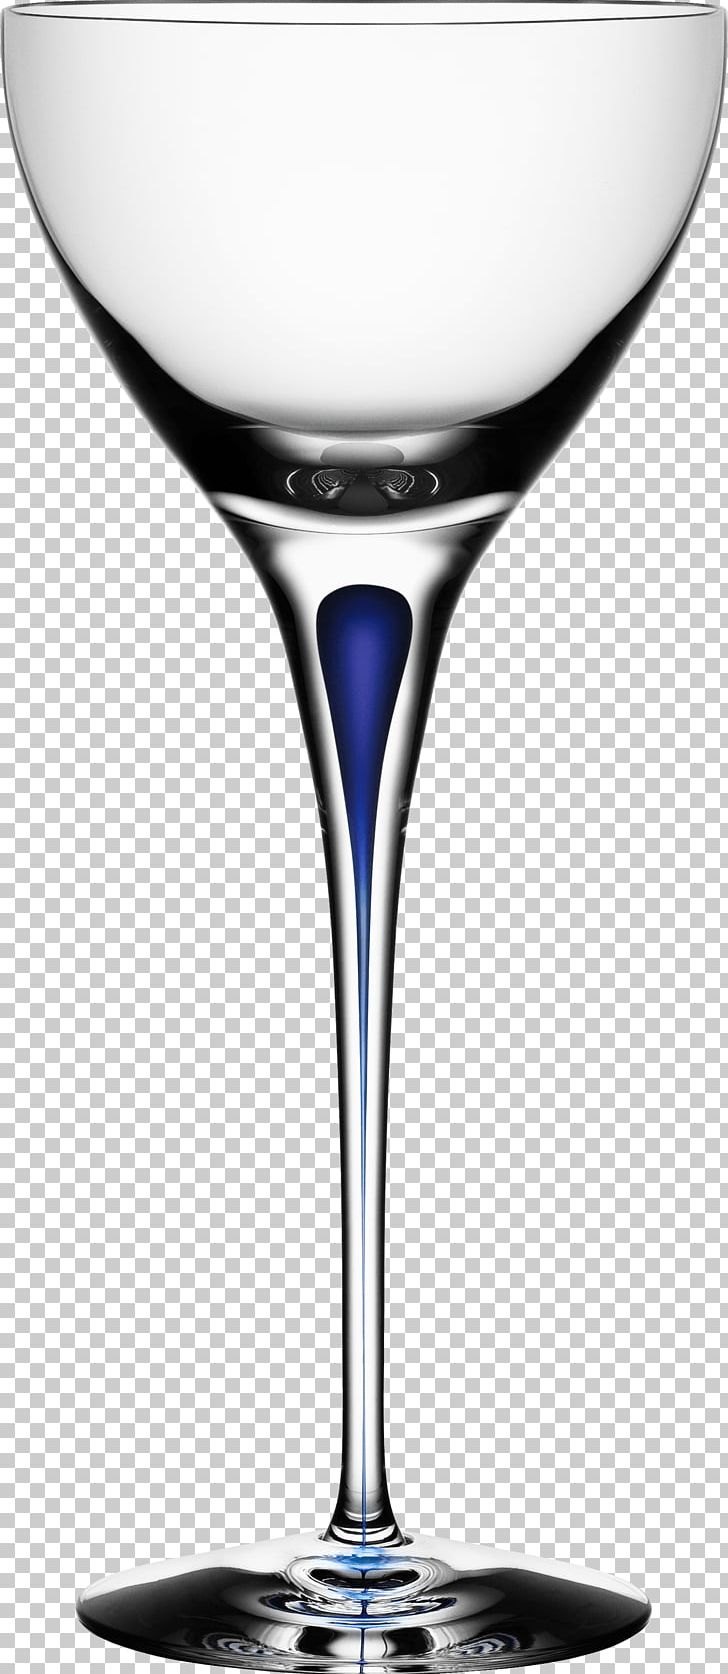 Wine Glass Wine Glass Champagne Glass Transparency And Translucency PNG, Clipart, Barware, Champagne Glass, Champagne Stemware, Cobalt Blue, Cocktail Free PNG Download